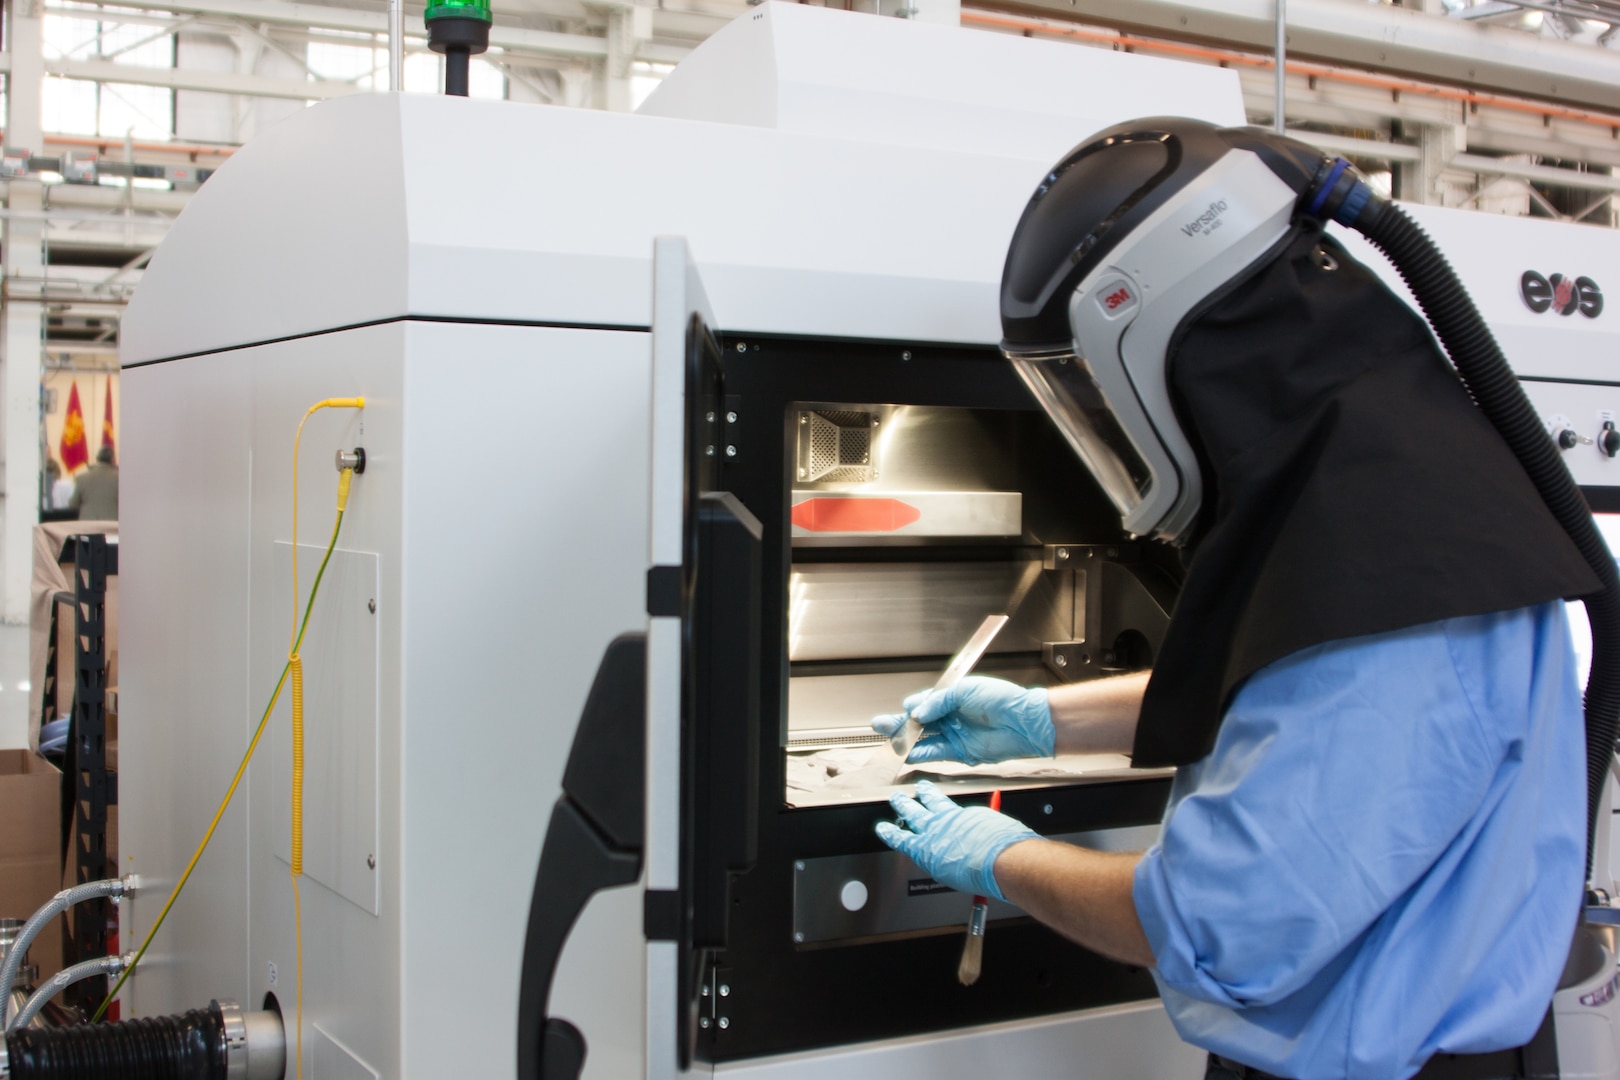 Prototype parts are 3D-printed in new Advanced and Additive Manufacturing Center of Excellence to troubleshoot machines at Joint Manufacturing and Technology Center, Rock Island Arsenal, Illinois, May 15, 2019 (U.S. Army/Debralee Best)